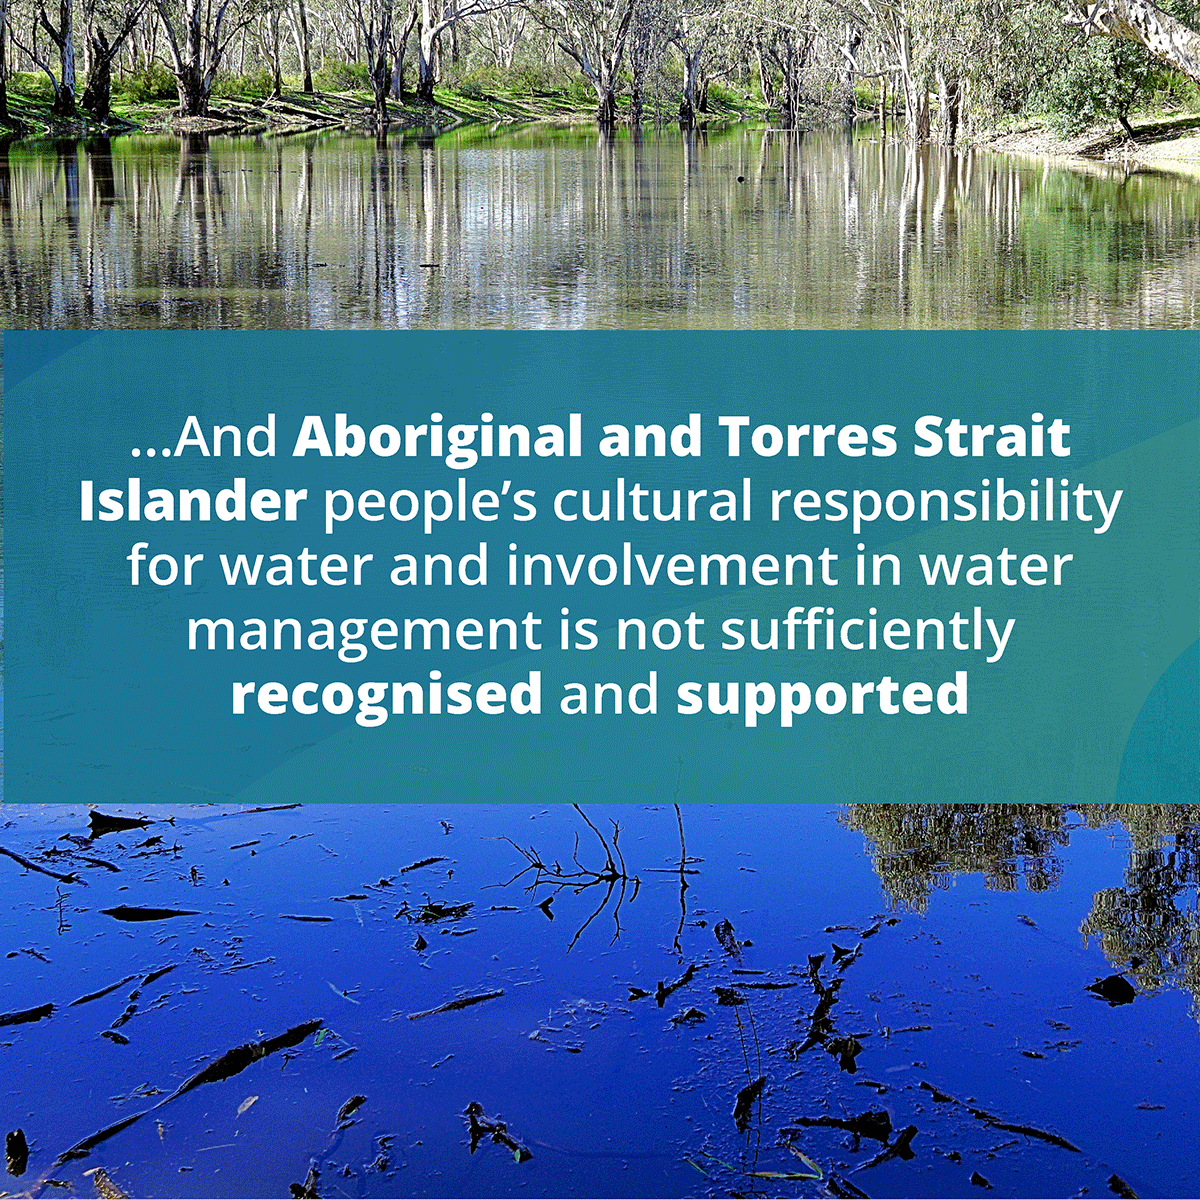 ...And Aboriginal and Torres Strait Islander people’s cultural responsibility for water and involvement in water management is not sufficiently recognised and supported